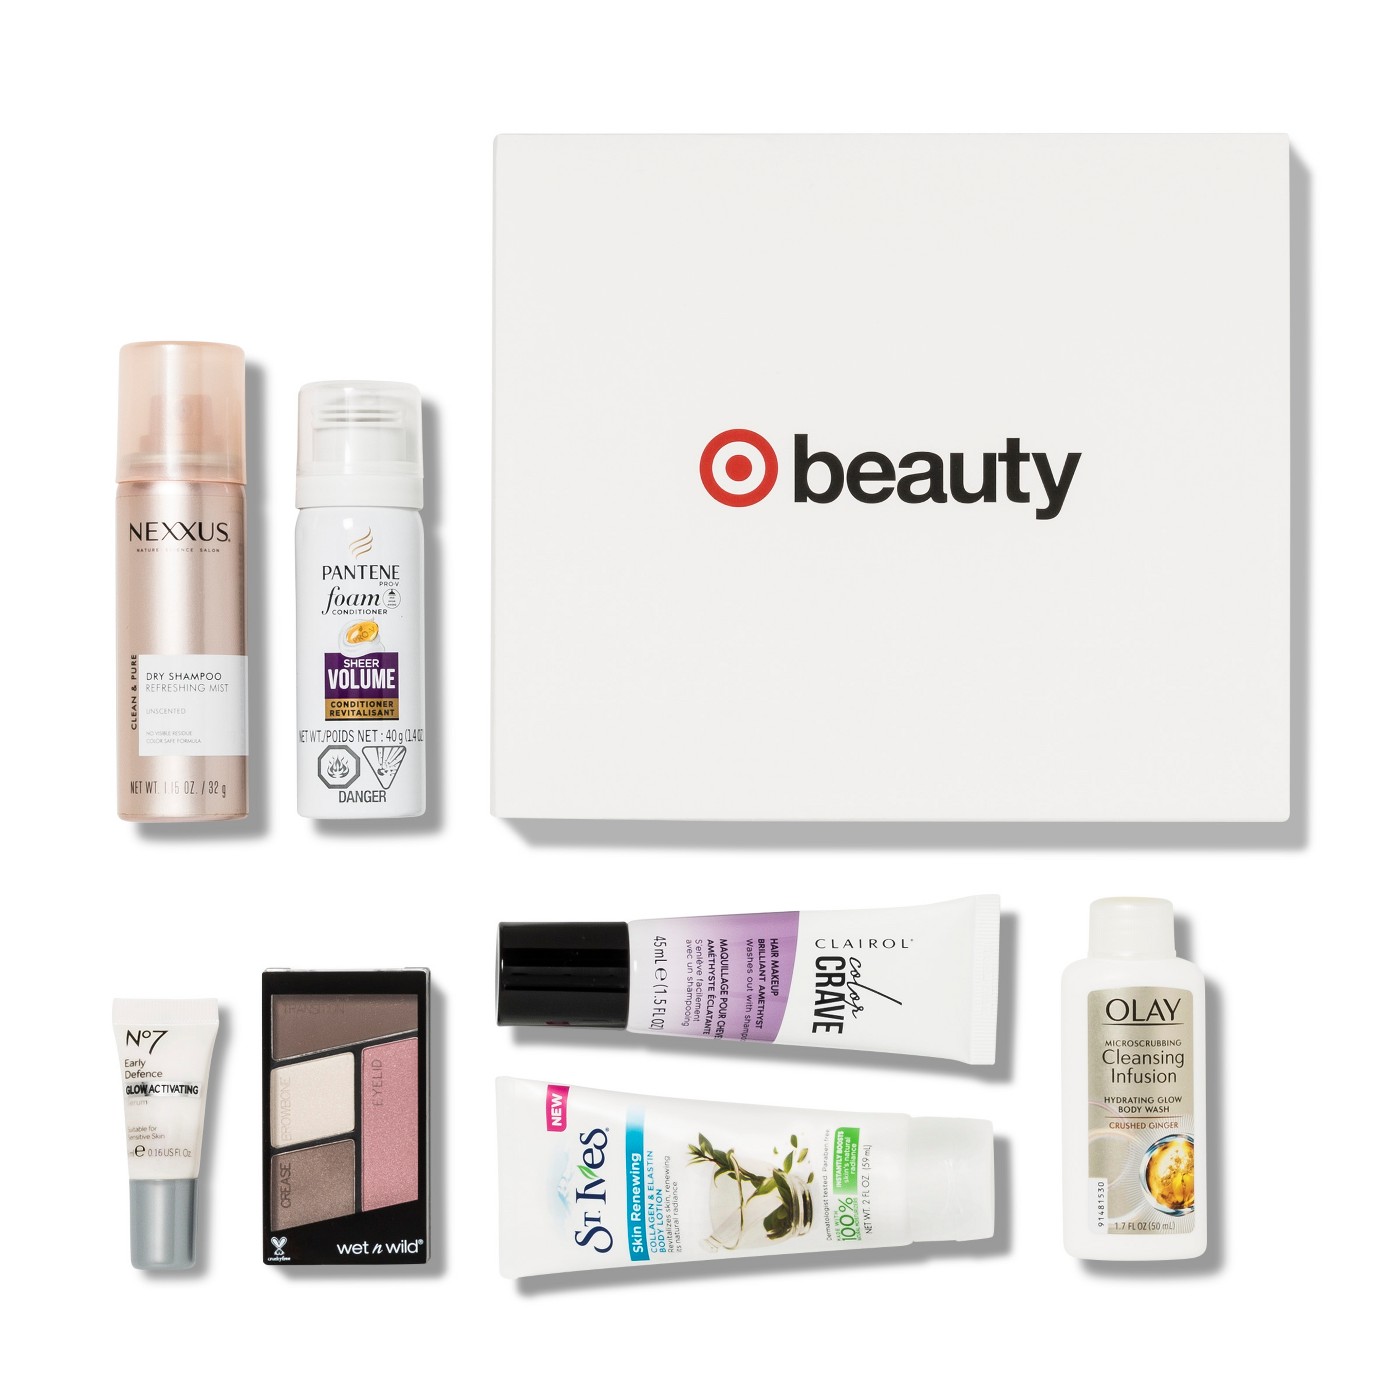 Target March Beauty Box Only $7.00!